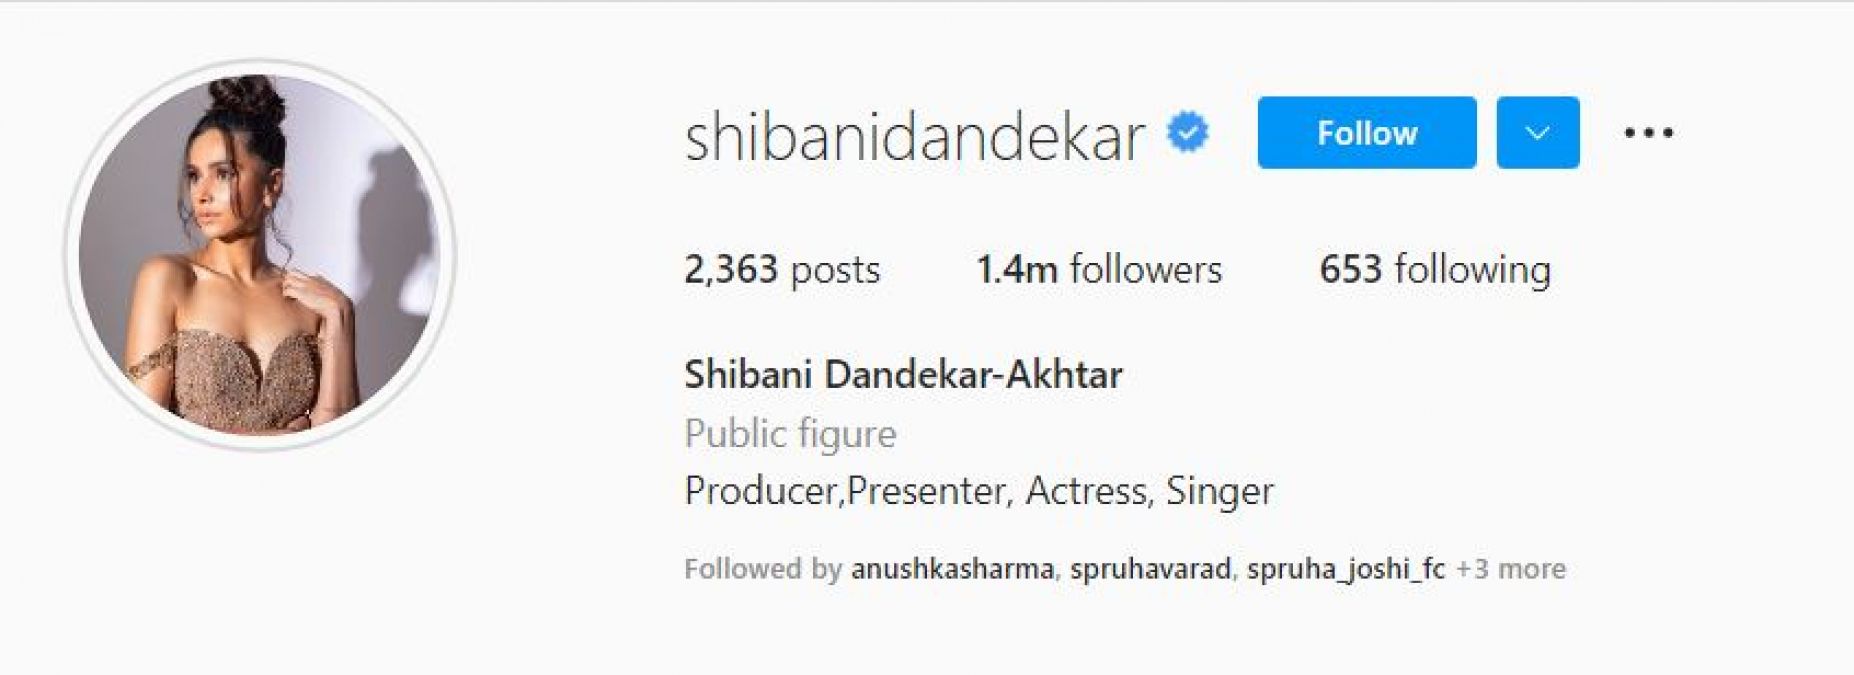 A few days after the wedding, Shibani removed 'Mrs. Akhtar' from the bio